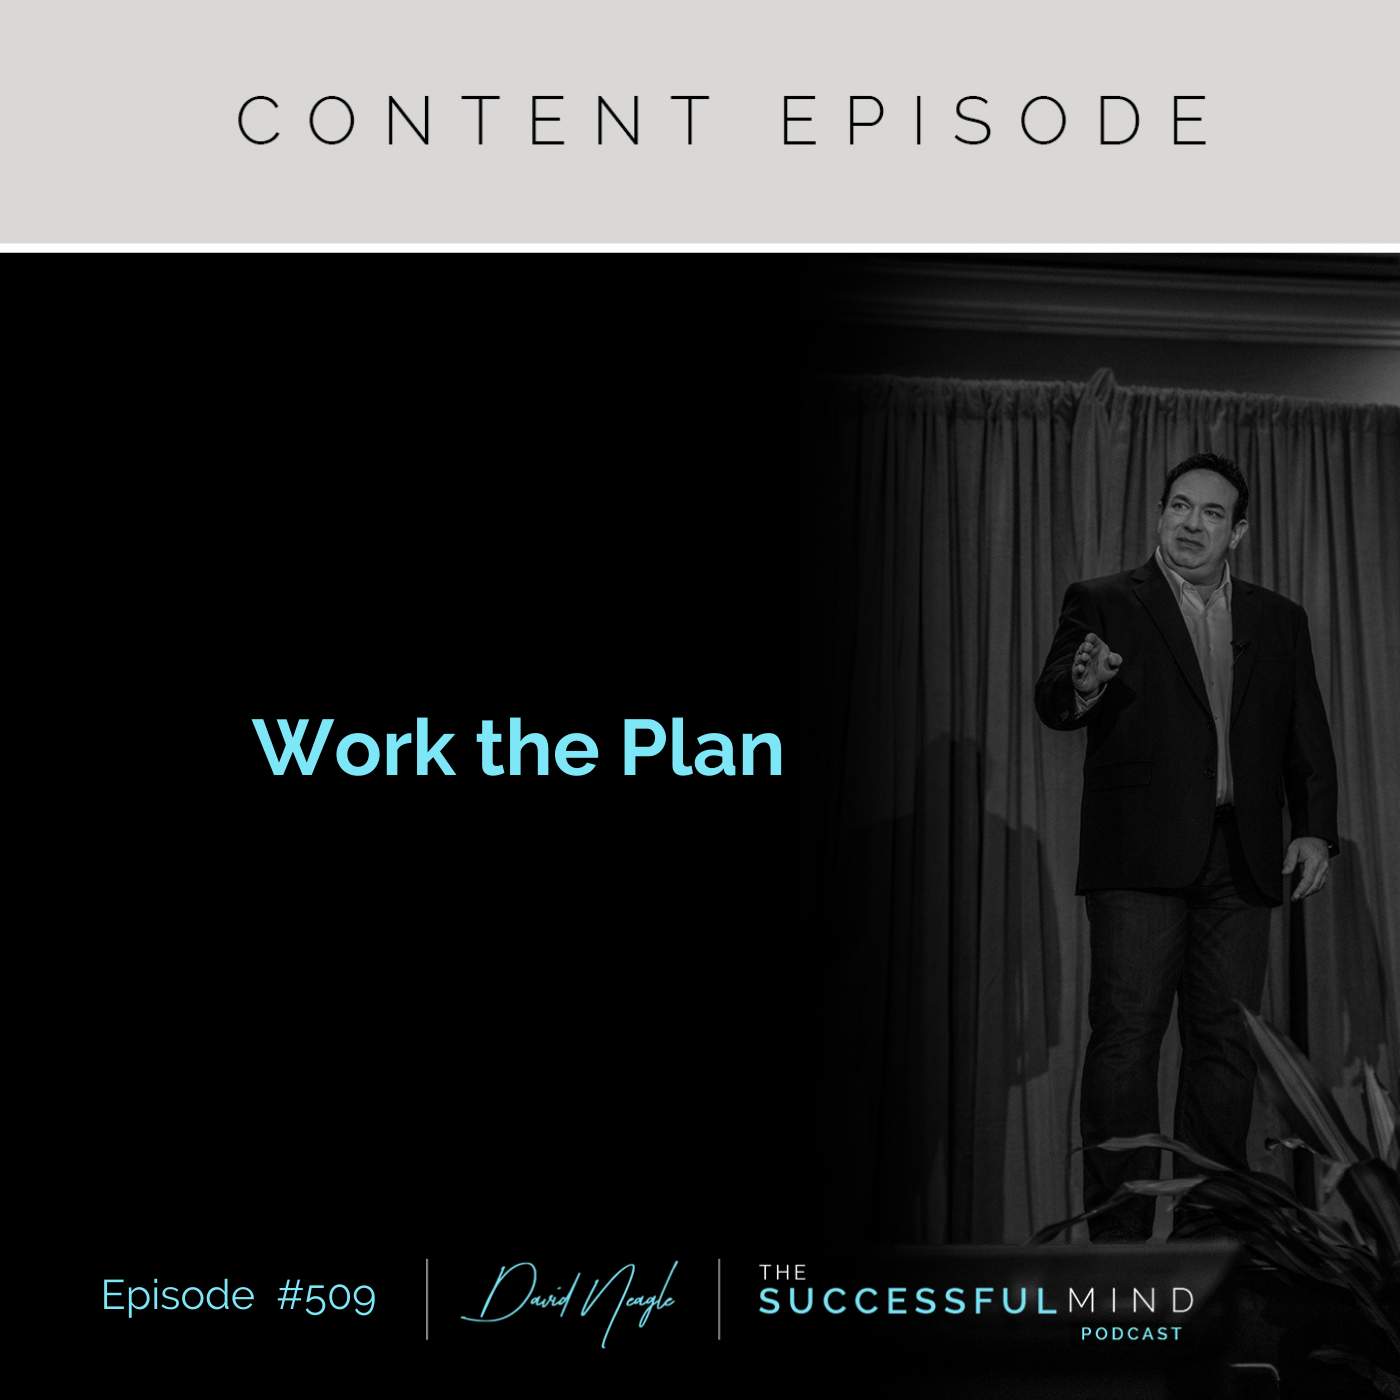 The Successful Mind Podcast - Episode 509 - Work the Plan